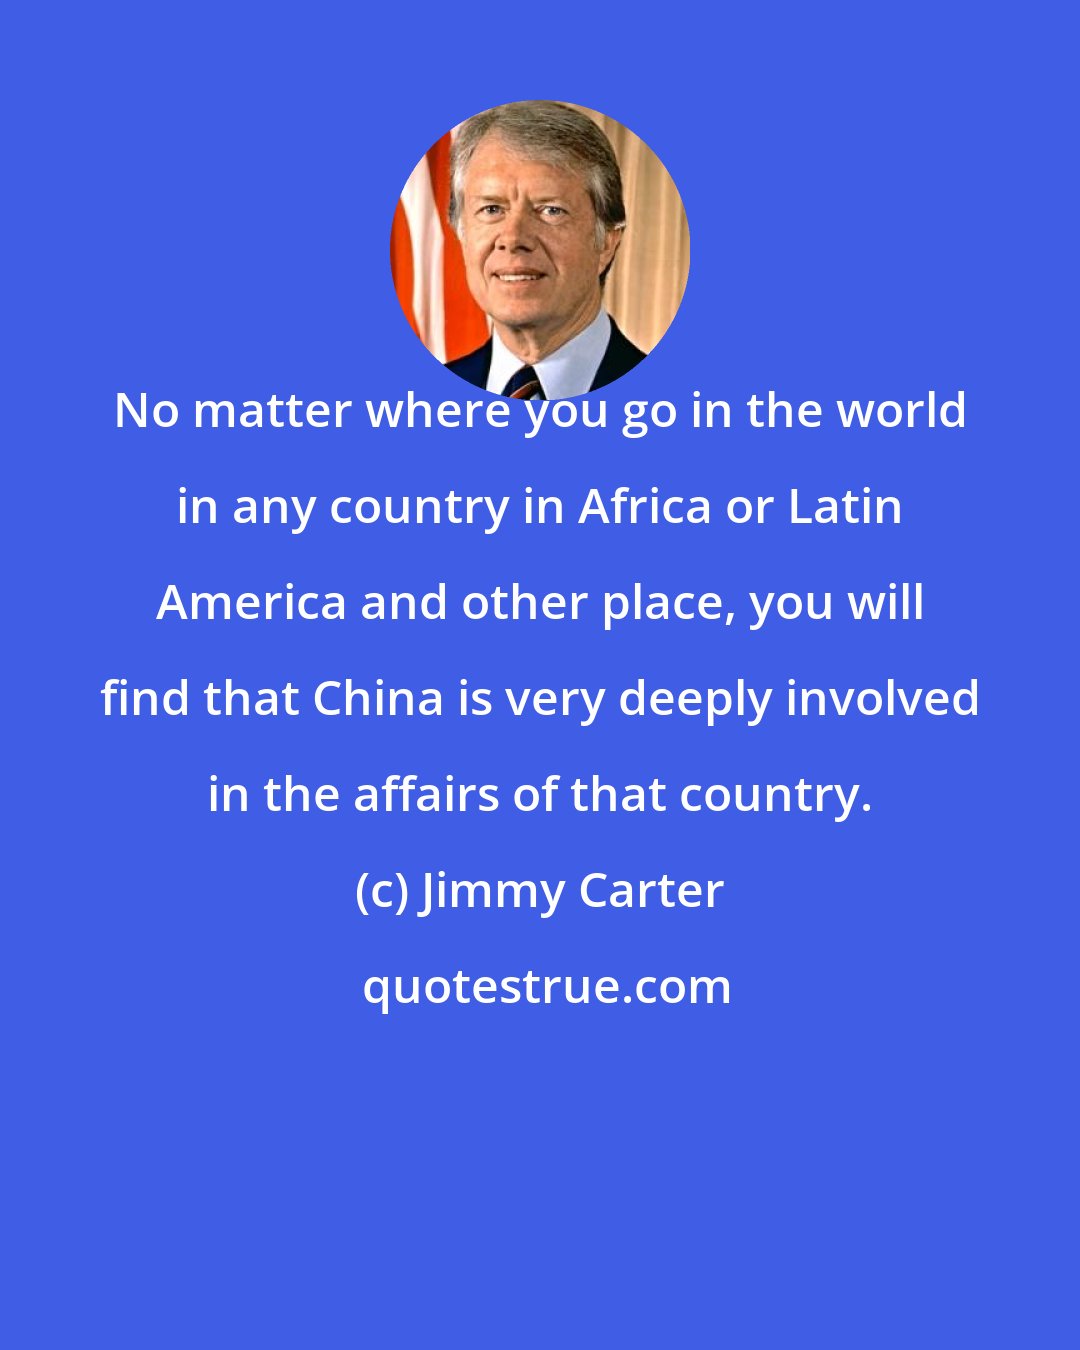 Jimmy Carter: No matter where you go in the world in any country in Africa or Latin America and other place, you will find that China is very deeply involved in the affairs of that country.